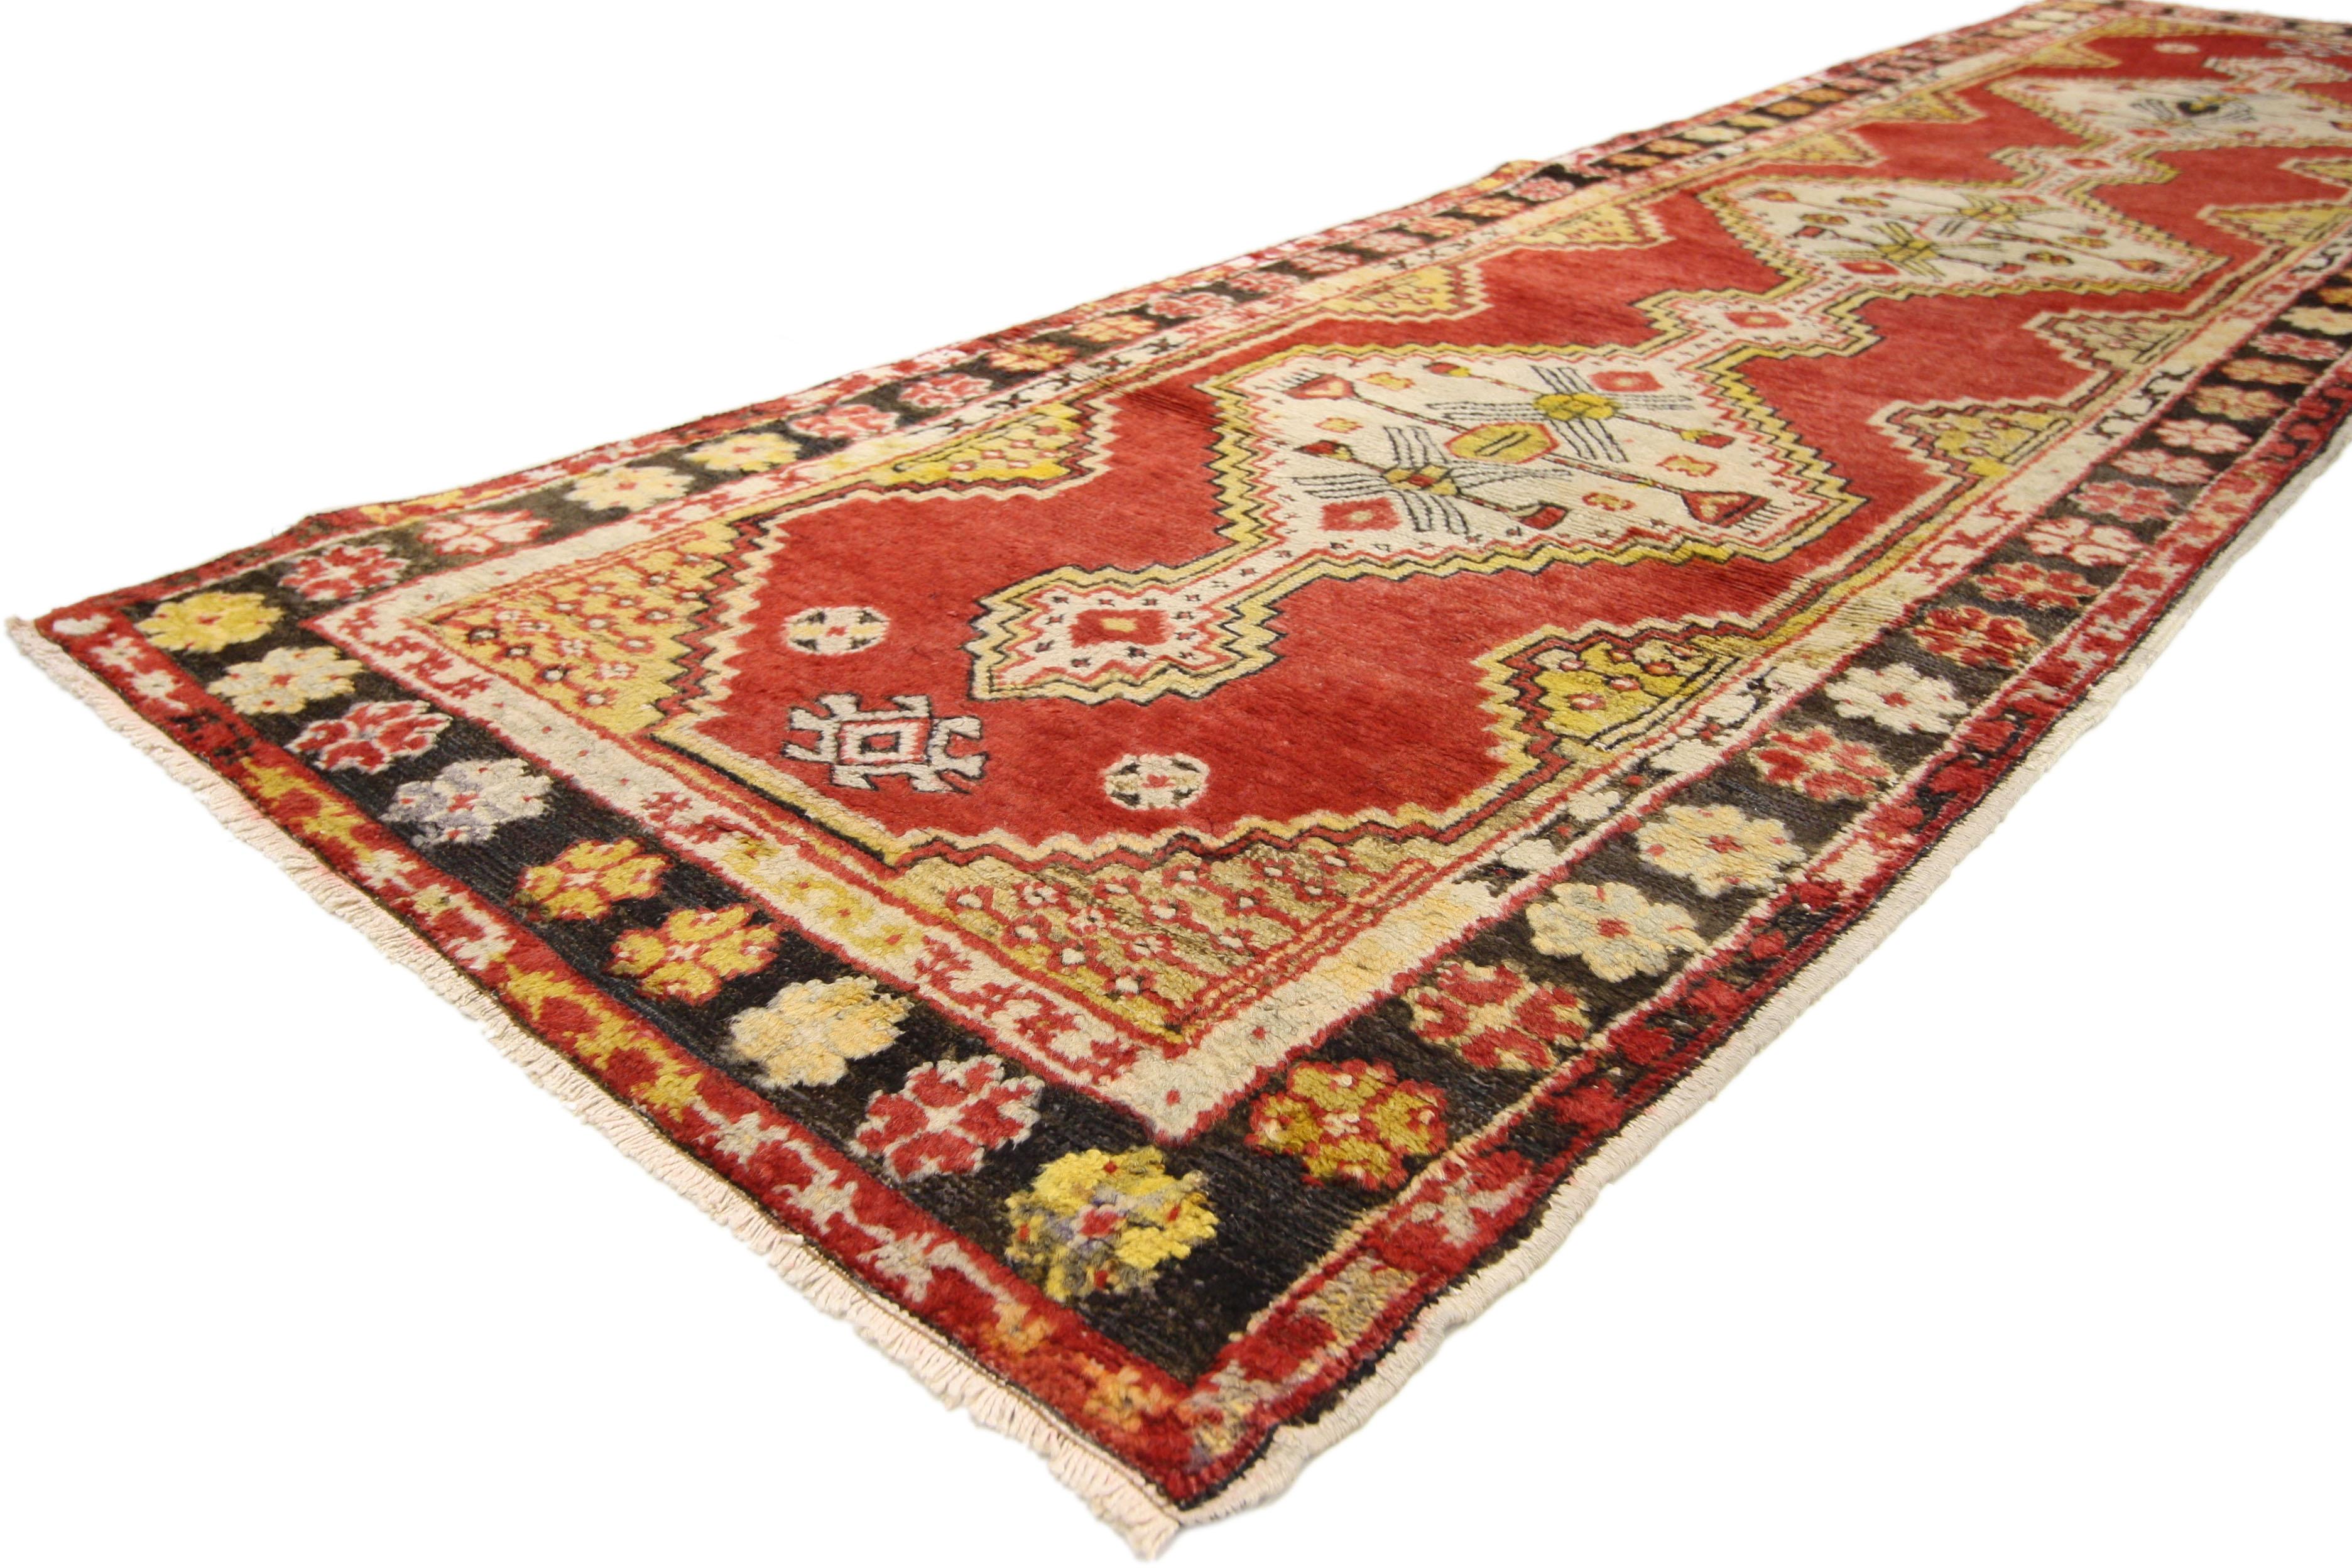 50727 vintage Turkish Oushak runner with Arts & Crafts style, Hallway runner. This hand knotted wool vintage Turkish Oushak runner features stepped hexagonal pole medallions with anchor pendants spread across an abrashed vermilion field. The